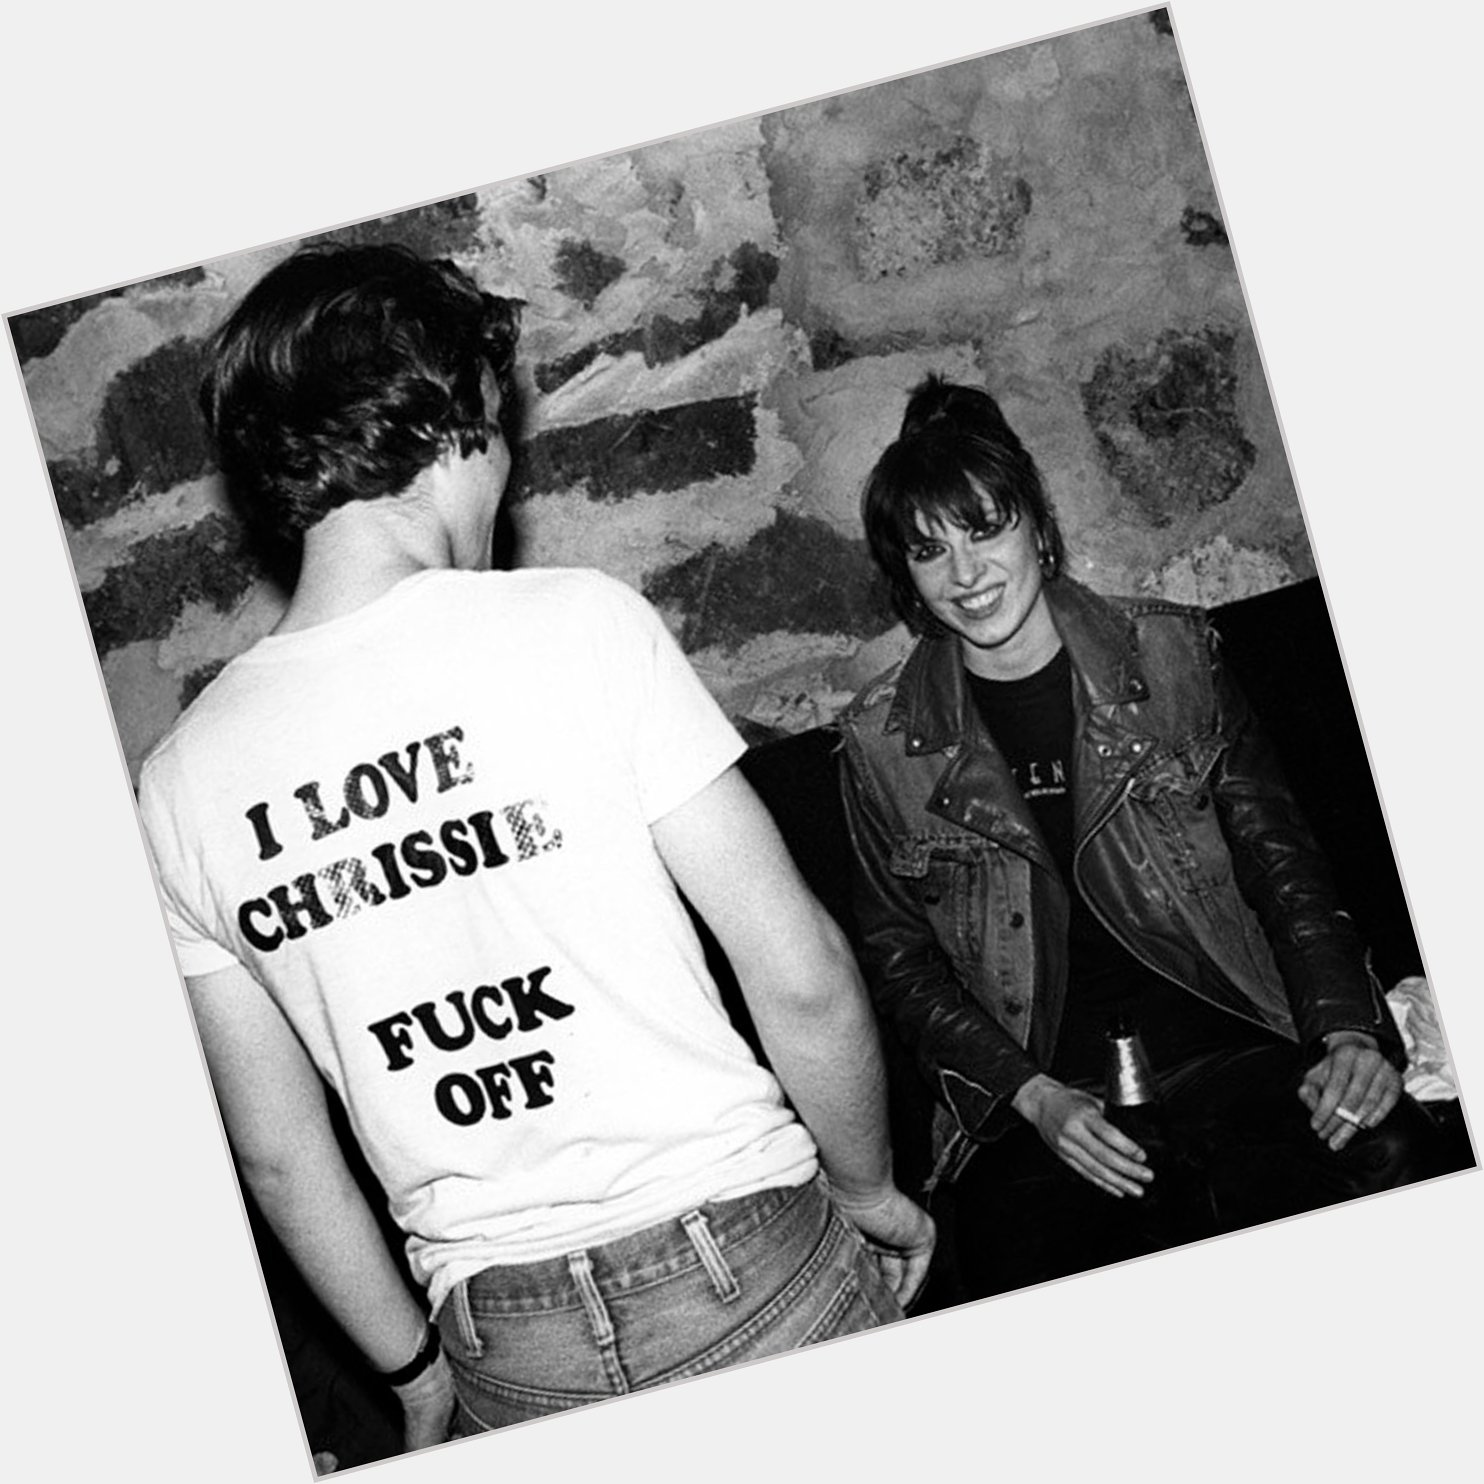 Happy Birthday to, Chrissie Hynde who turns 69 years young today 